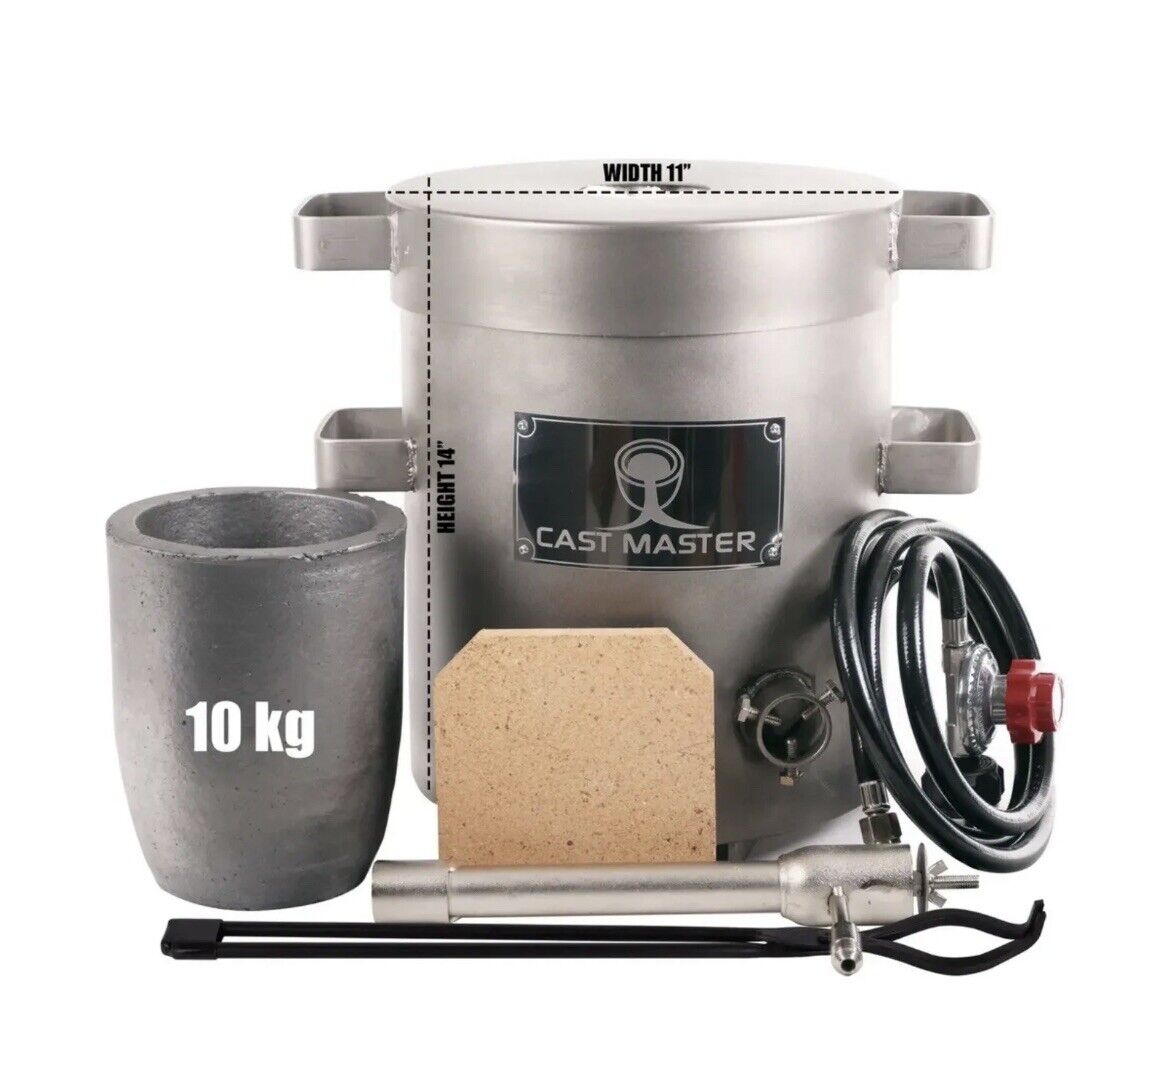  10 KG Large Capacity Propane Furnace Deluxe Kit with Crucible for melting metal